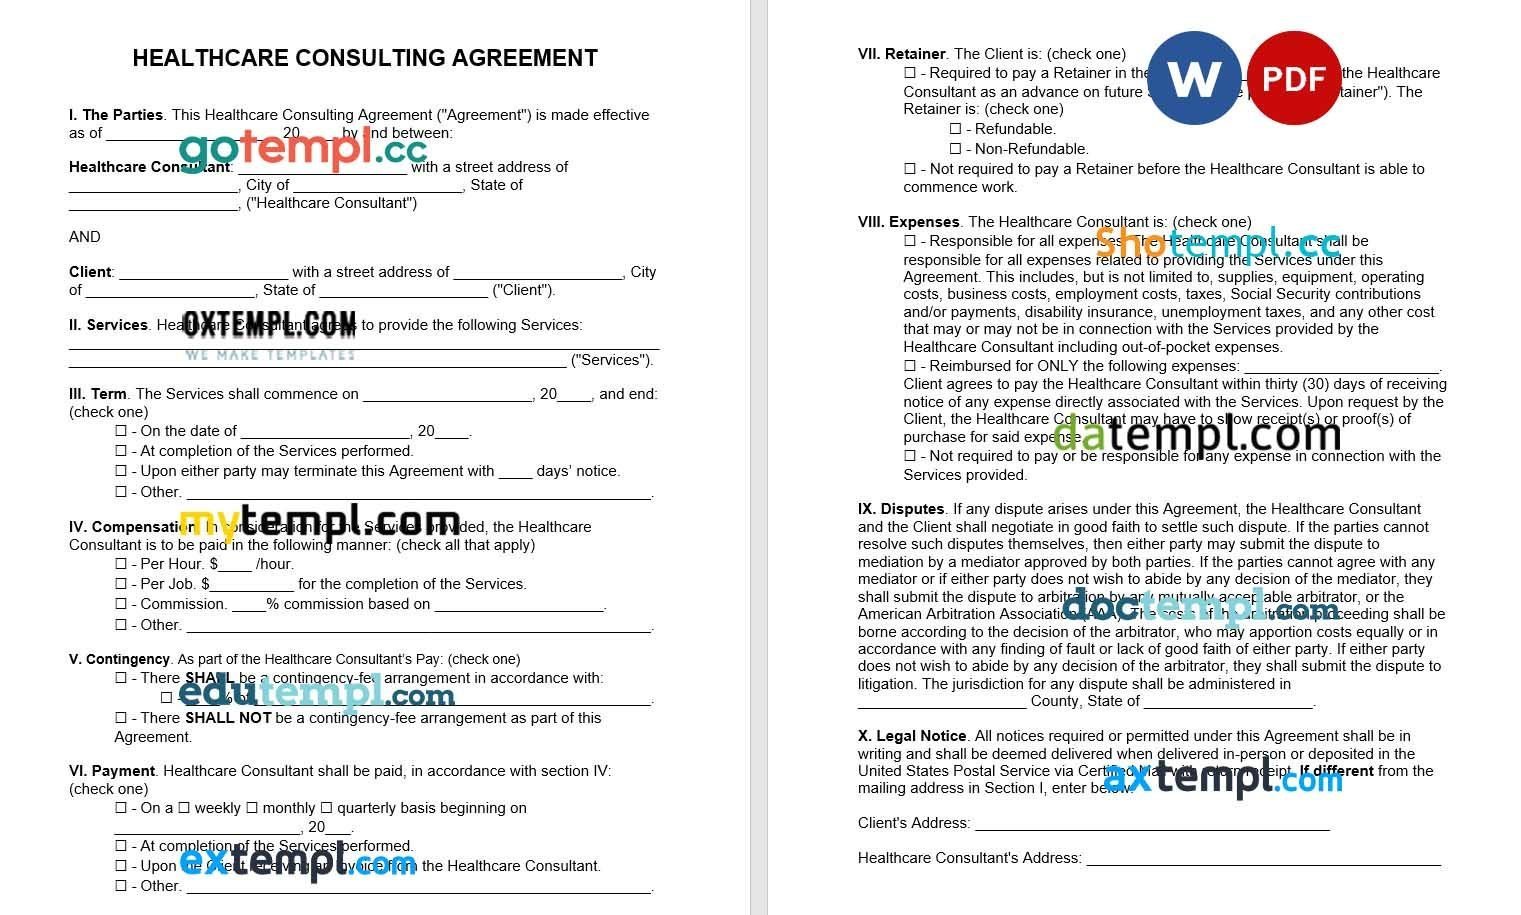 Healthcare Consultant Agreement example, fully aditable